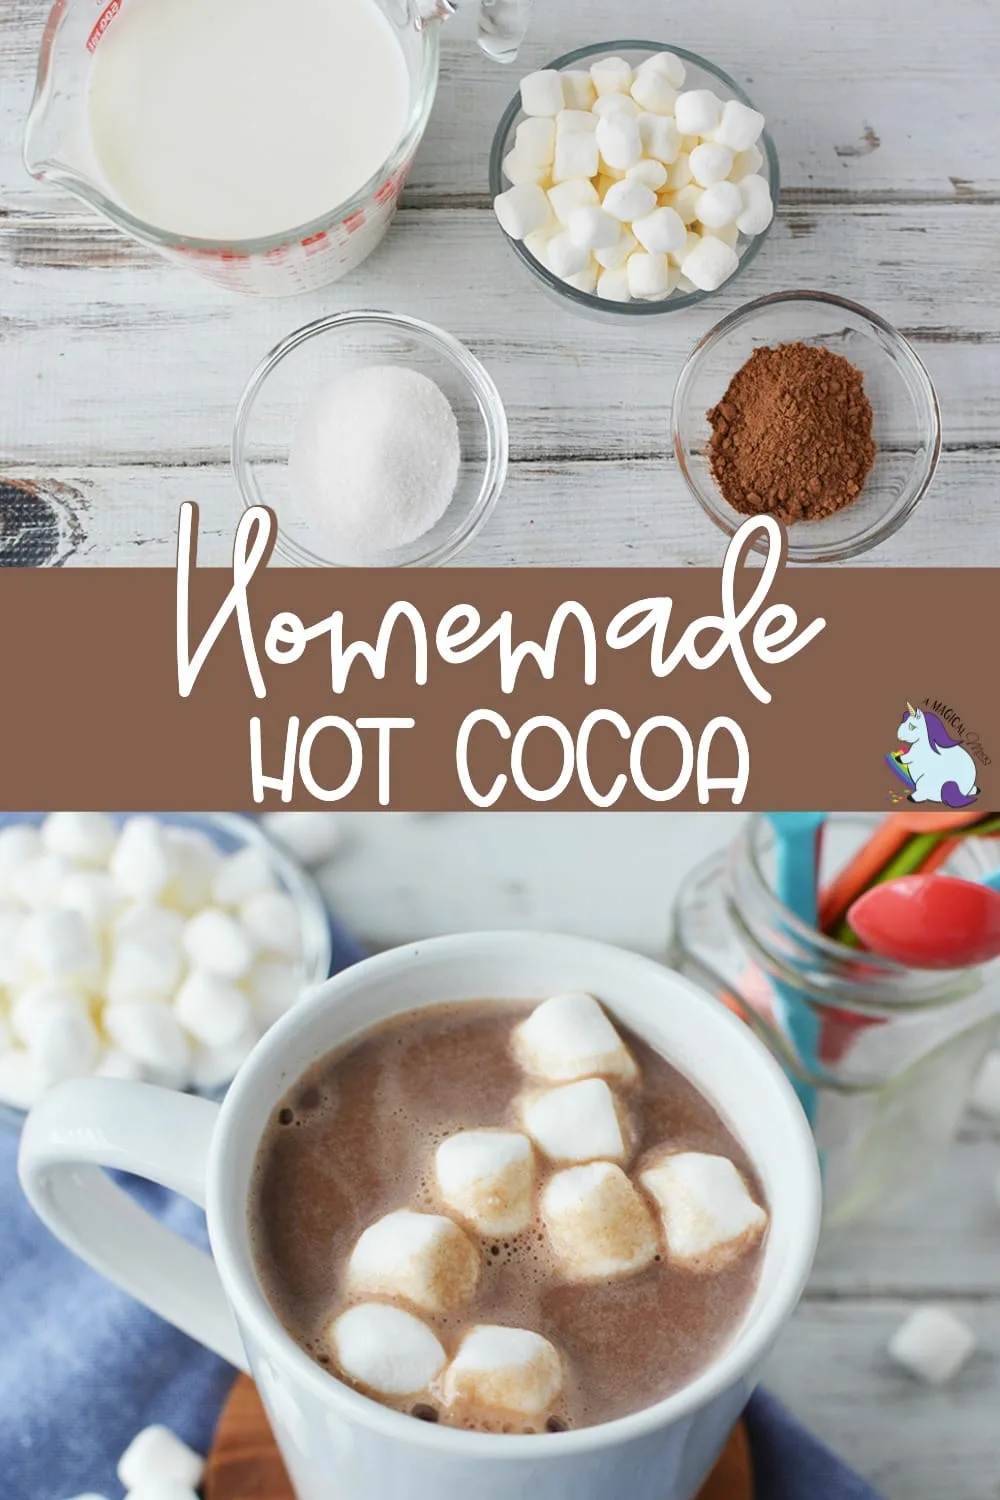 Ingredients to make hot chocolate and mug full of hot cocoa